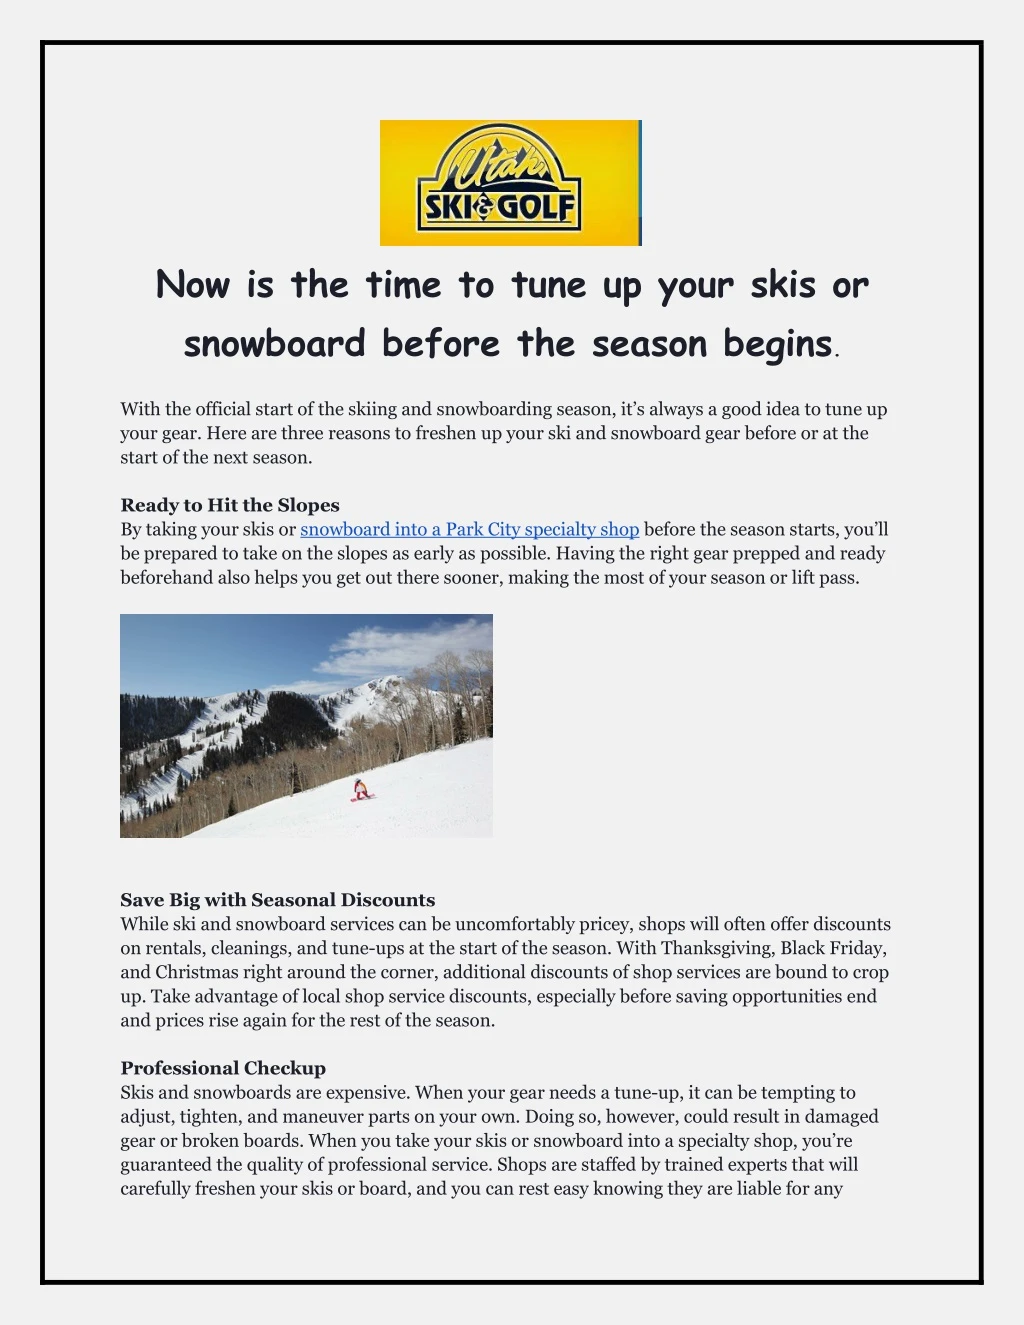 now is the time to tune up your skis or snowboard